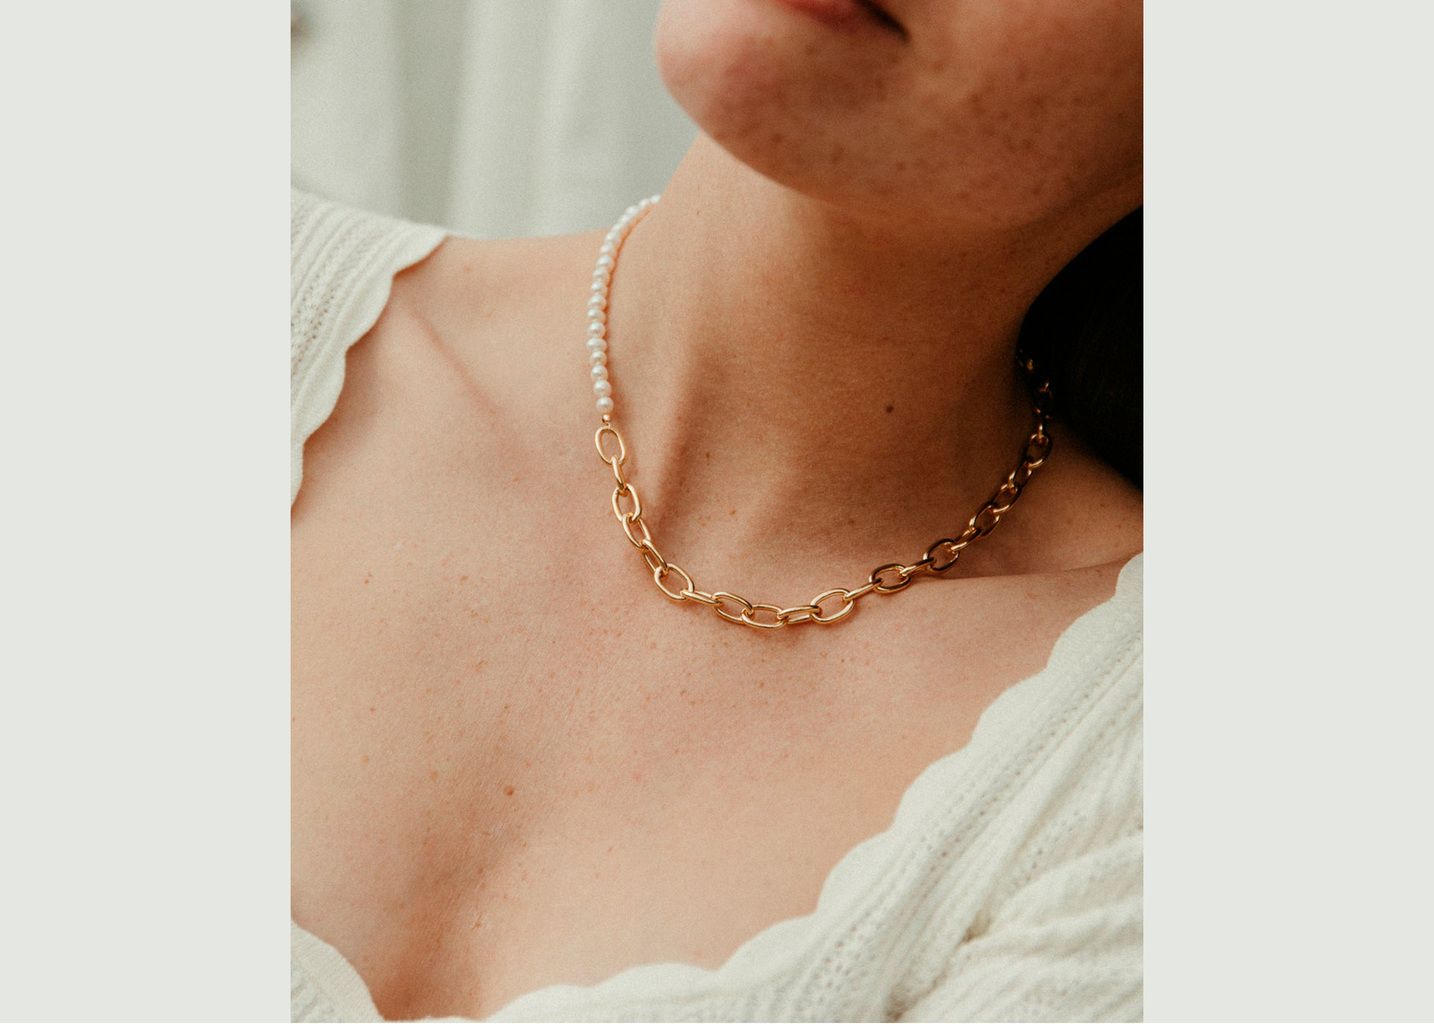 Tokyo two-material choker necklace - Gisel B.